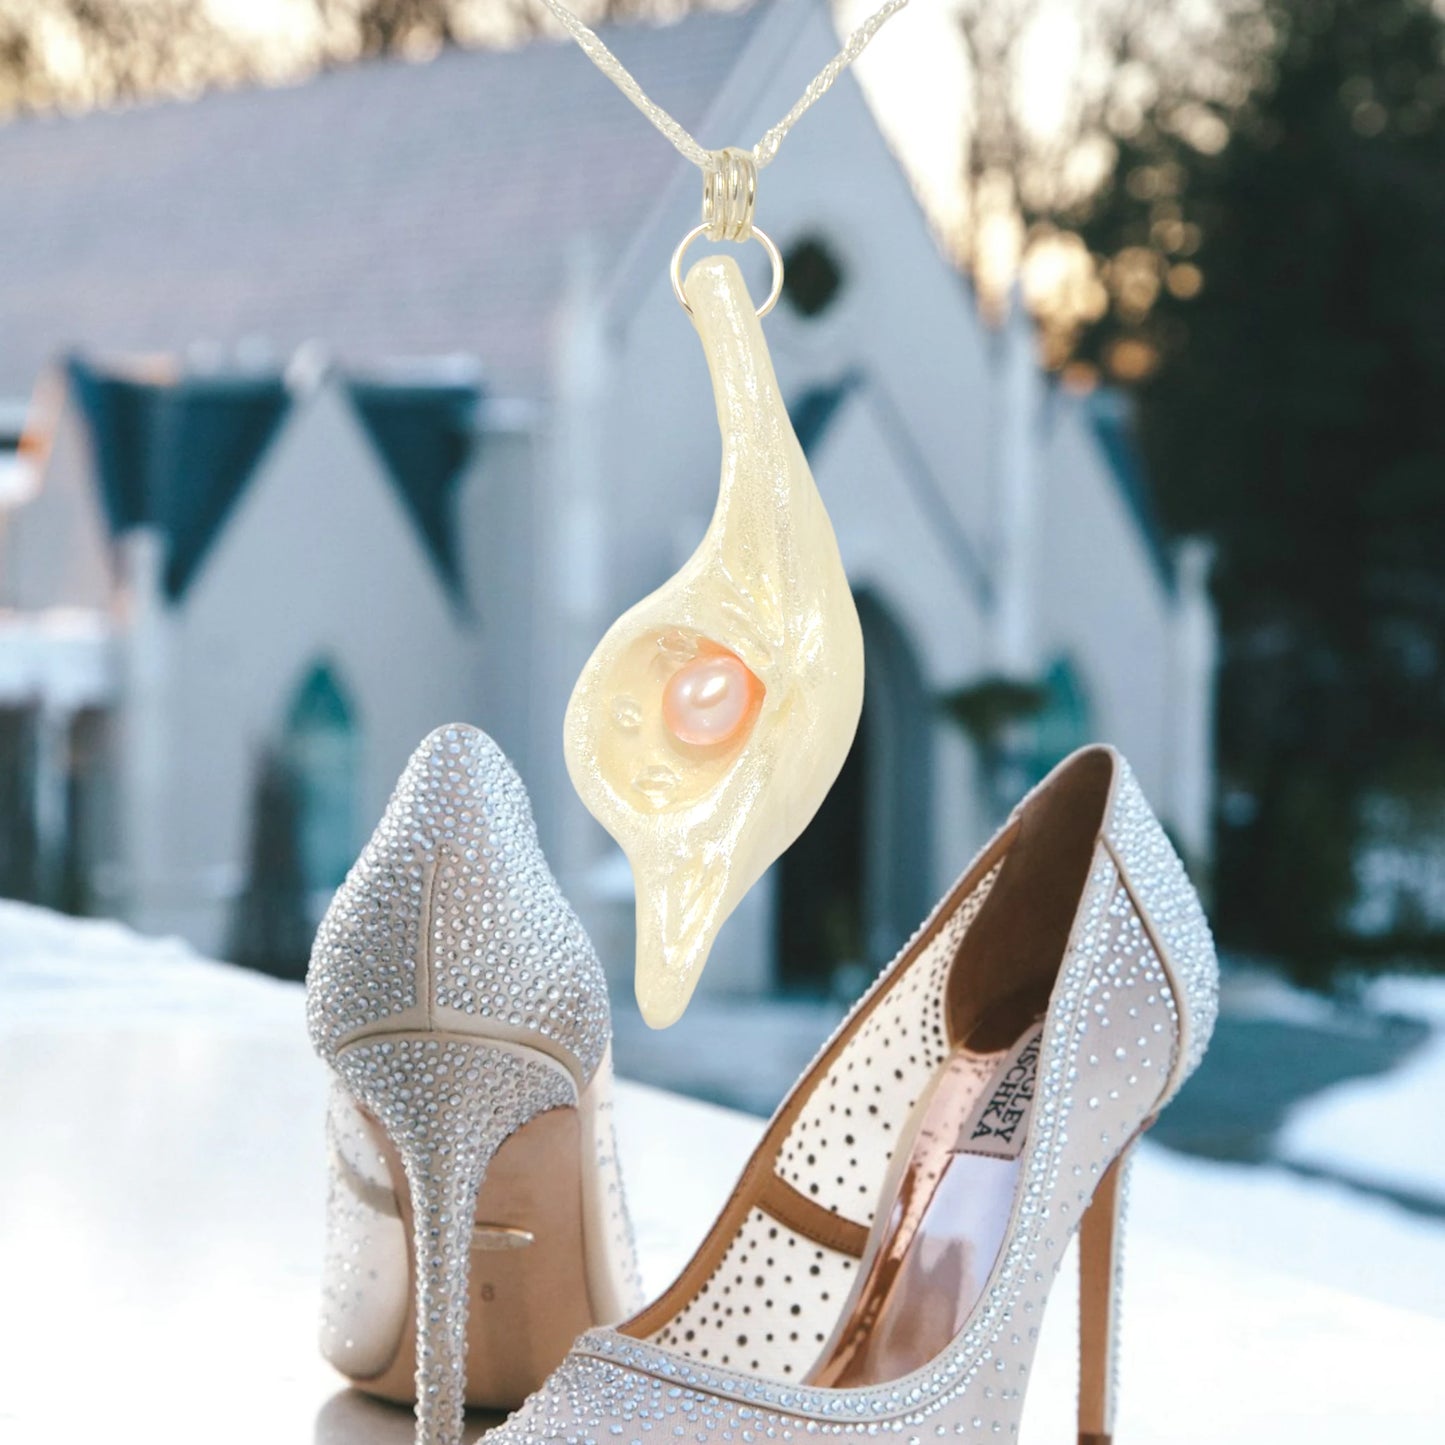 The pendant champagne on ice is shown hanging from a chain.  A church is blurred in the backgroun.  A fancy pair of rhinestone studded high heels are beneath the pendant.  Wedding vibes. van isle goddess dot com